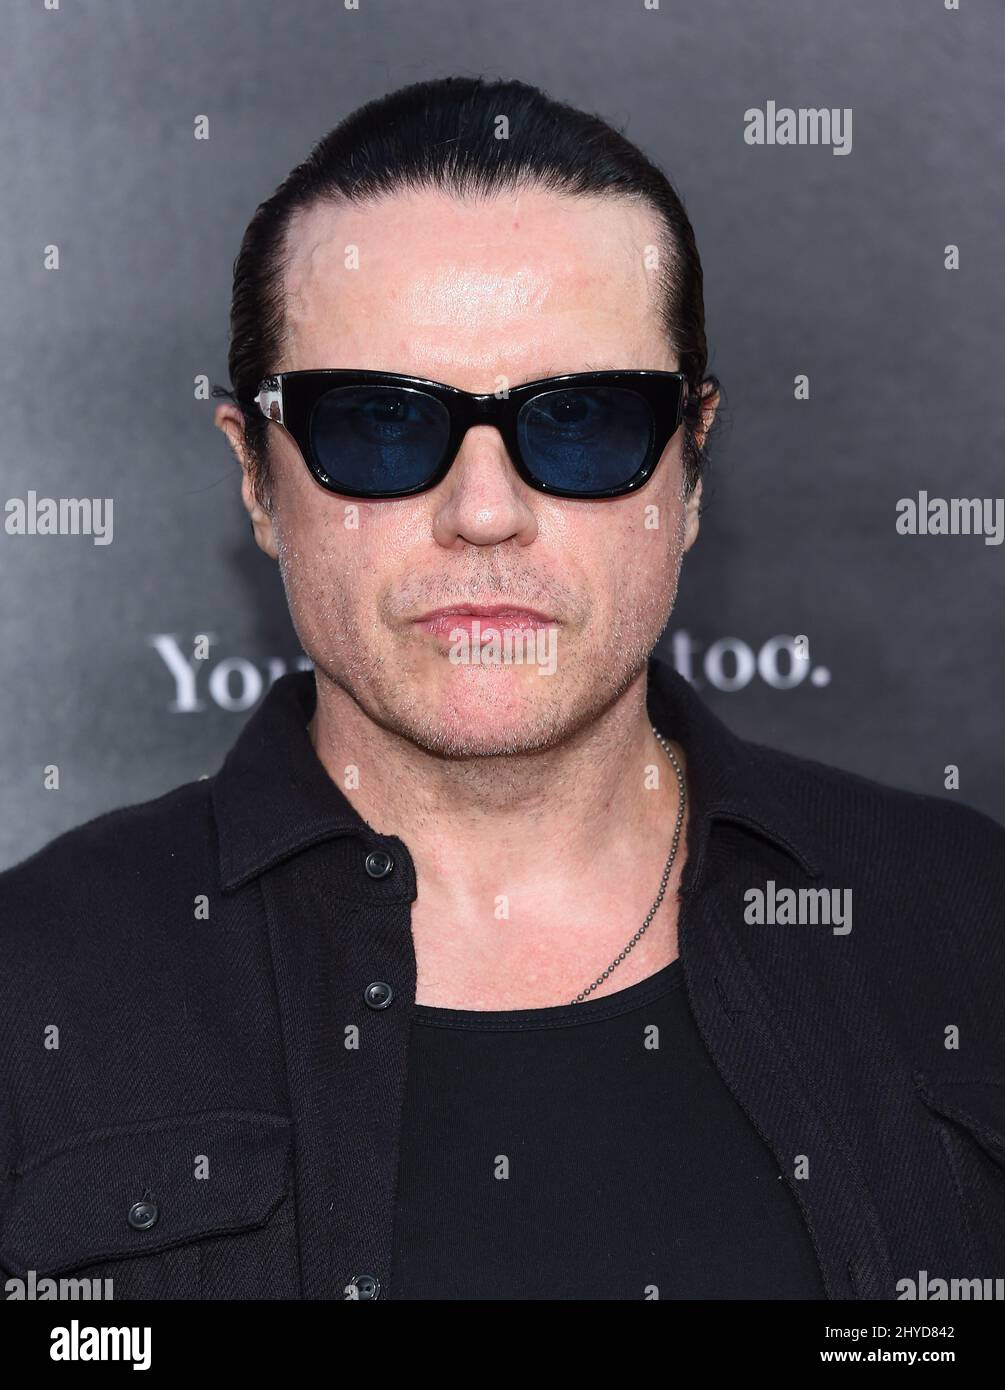 Ian Astbury attending the It world premiere held at the TCL Chinese Theatre in Los Angeles Stock Photo